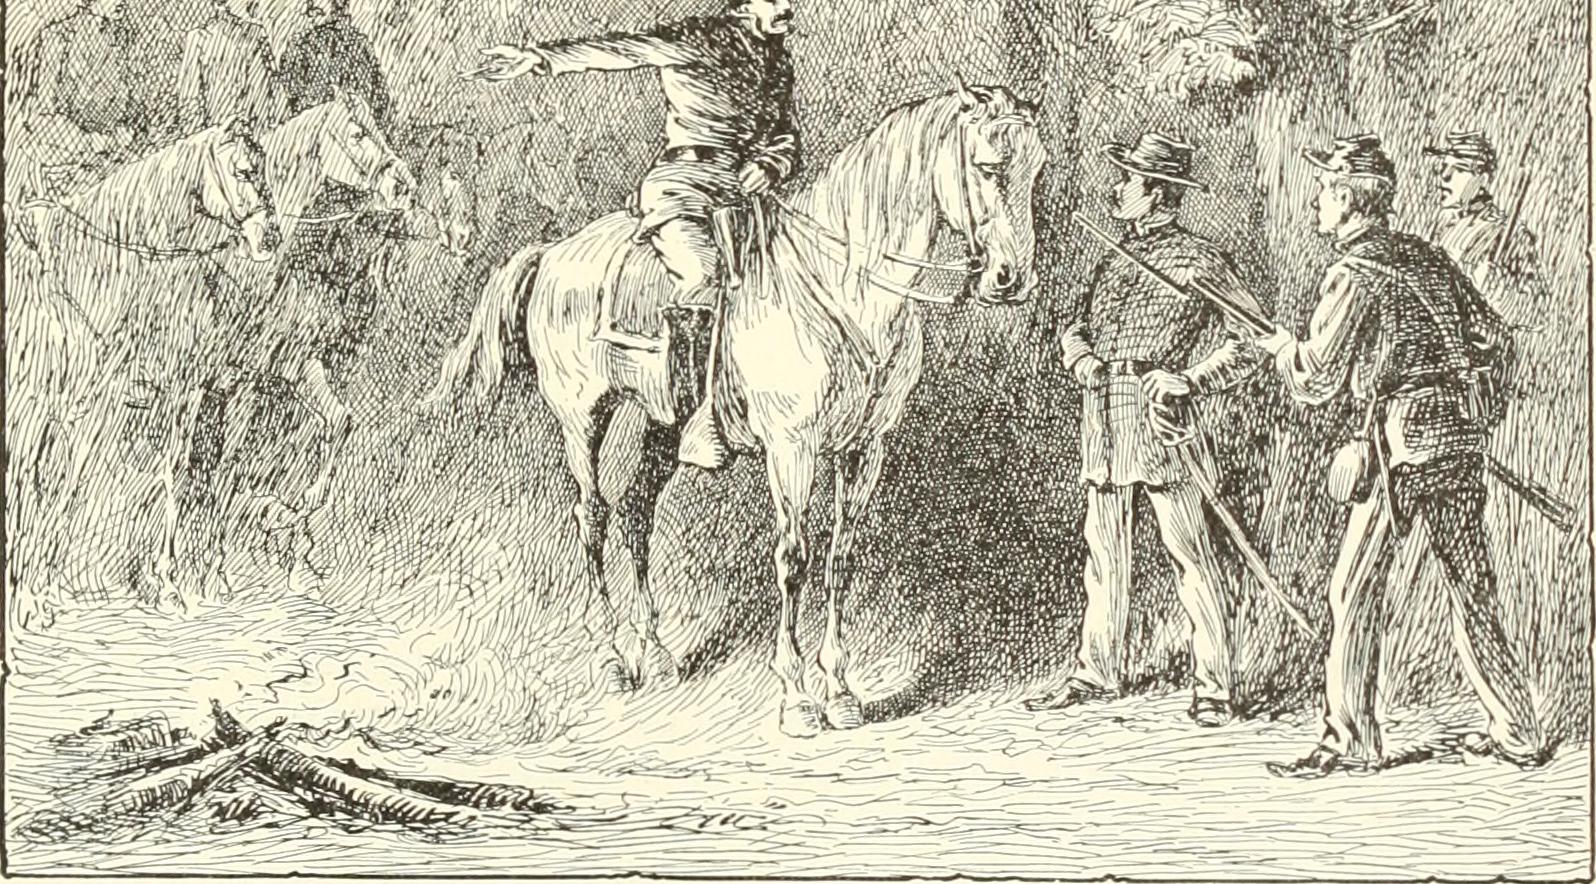 Image from page 564 of "The story of American heroism; thrilling narratives of personal adventures during the great Civil war, as told by the medal winners and roll of honor men" (1897)